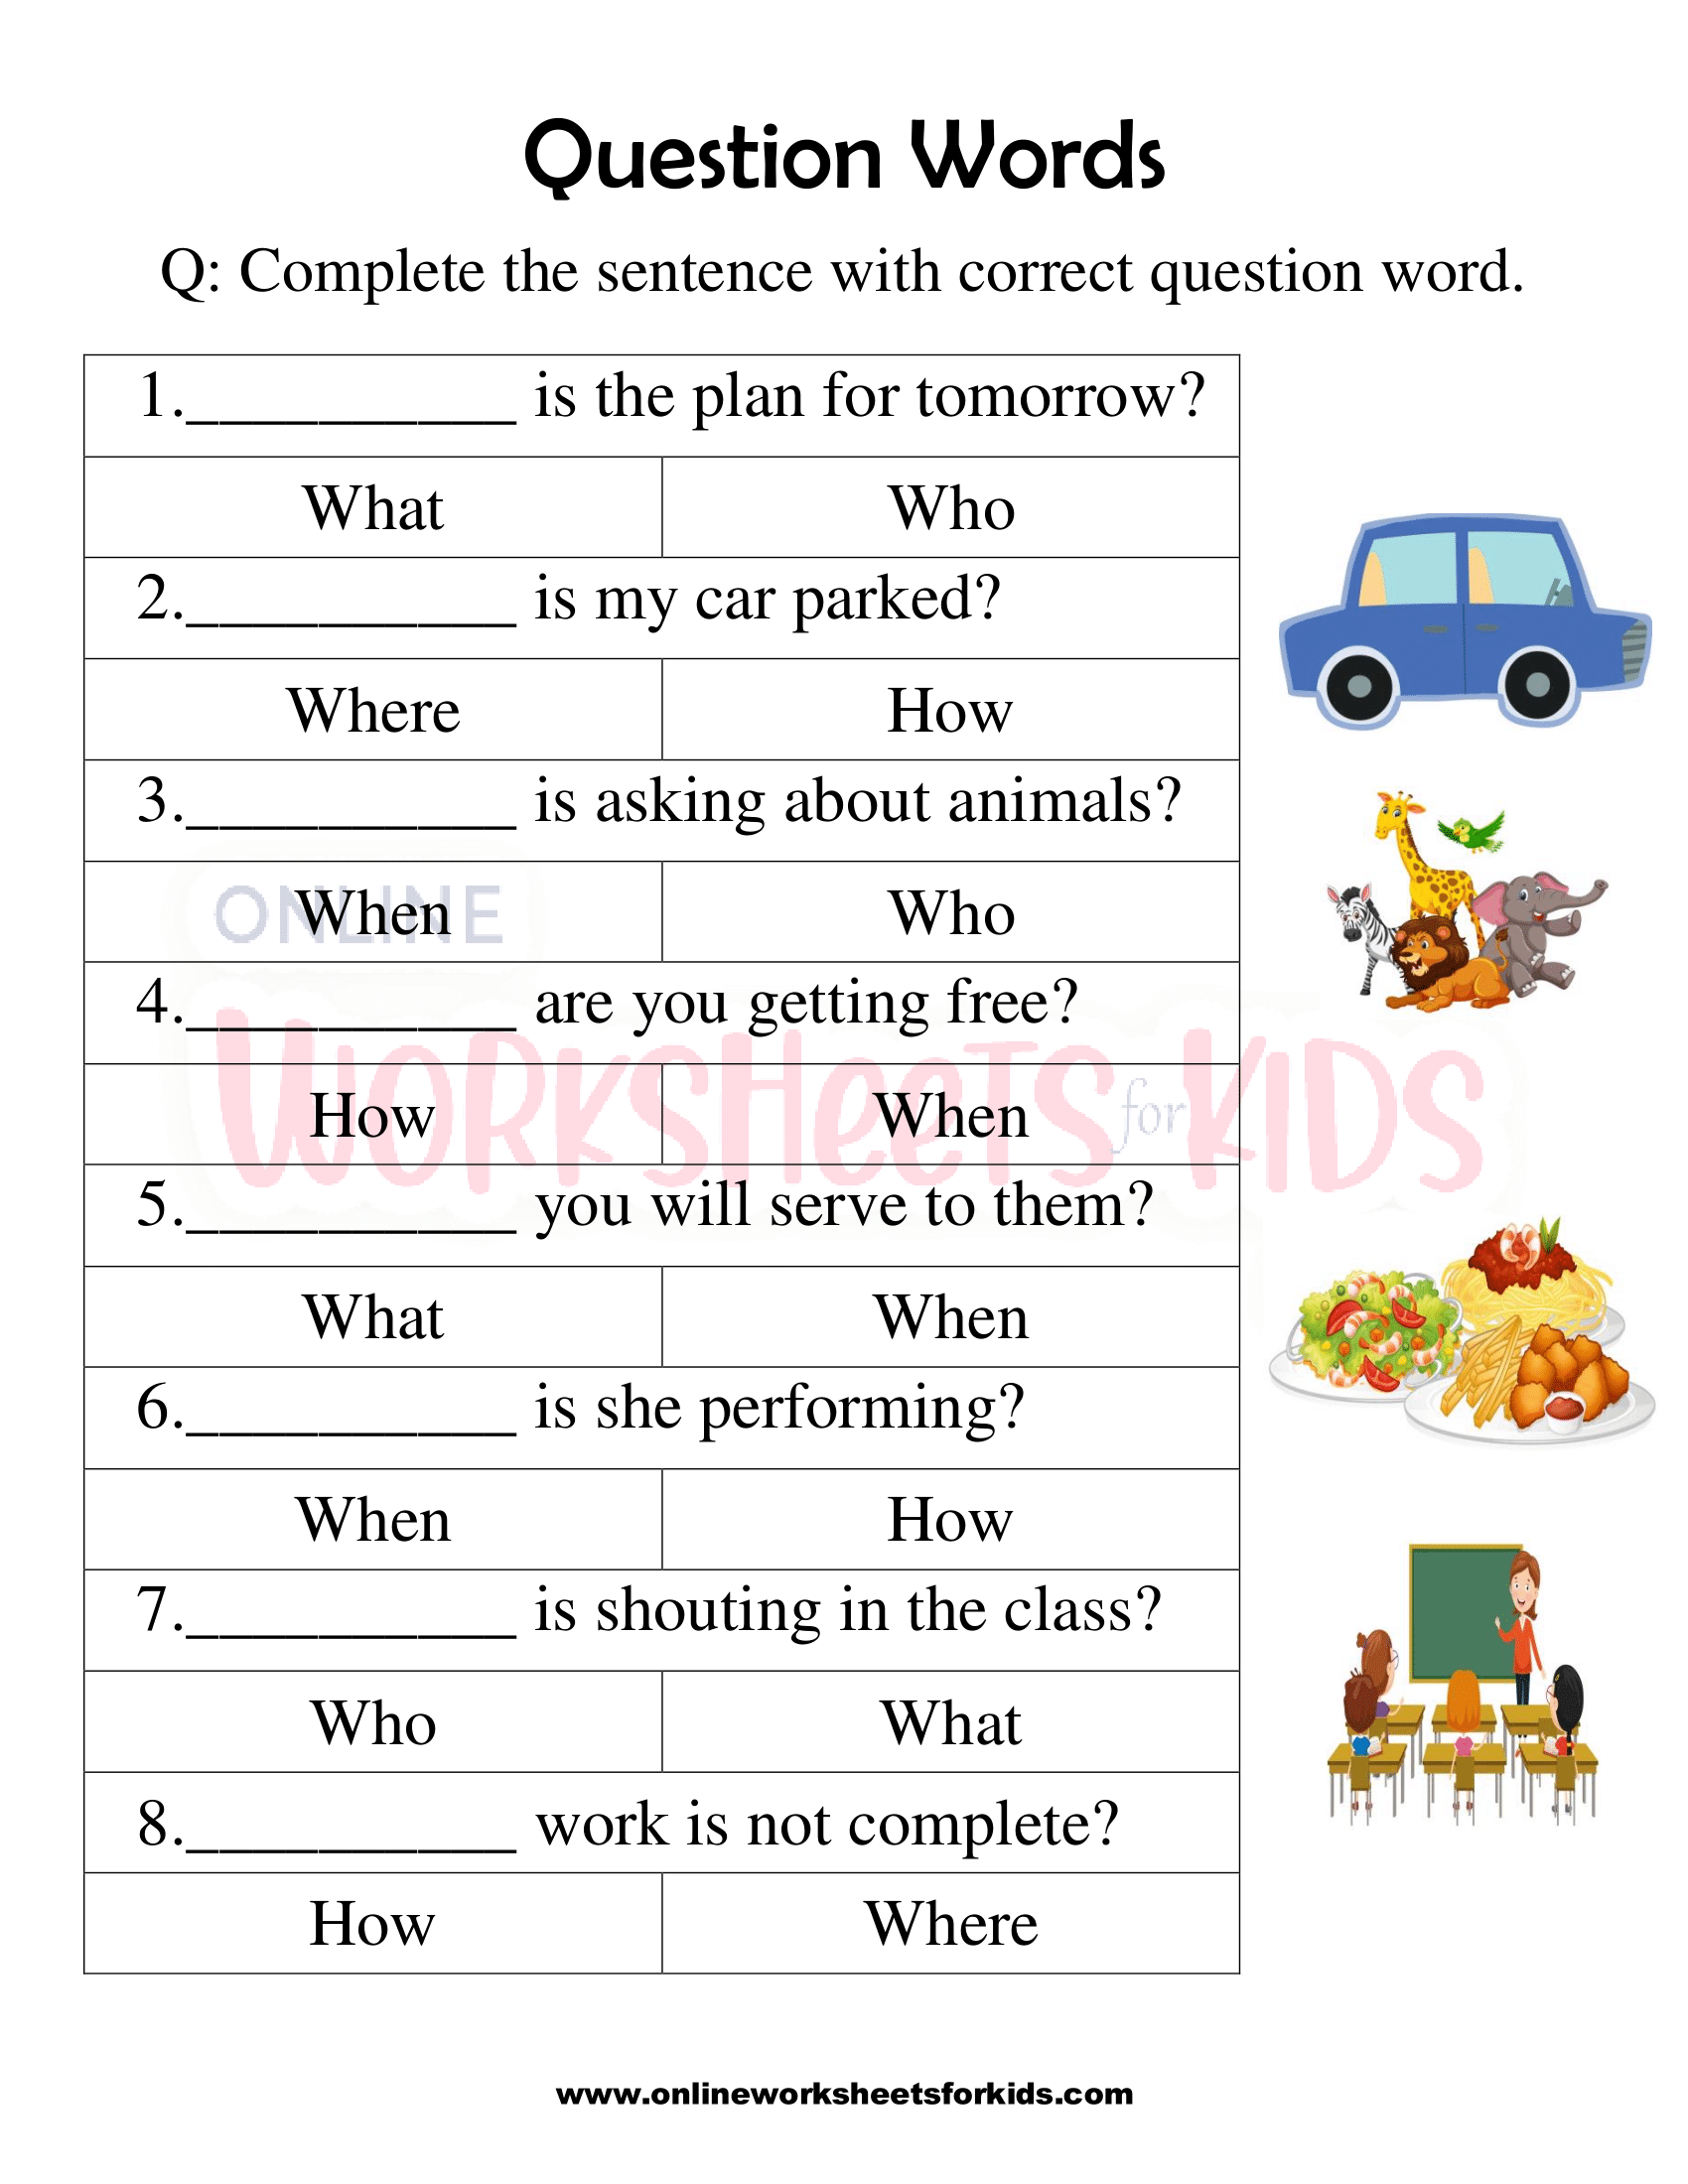 question-word-worksheet-for-grade-1-8